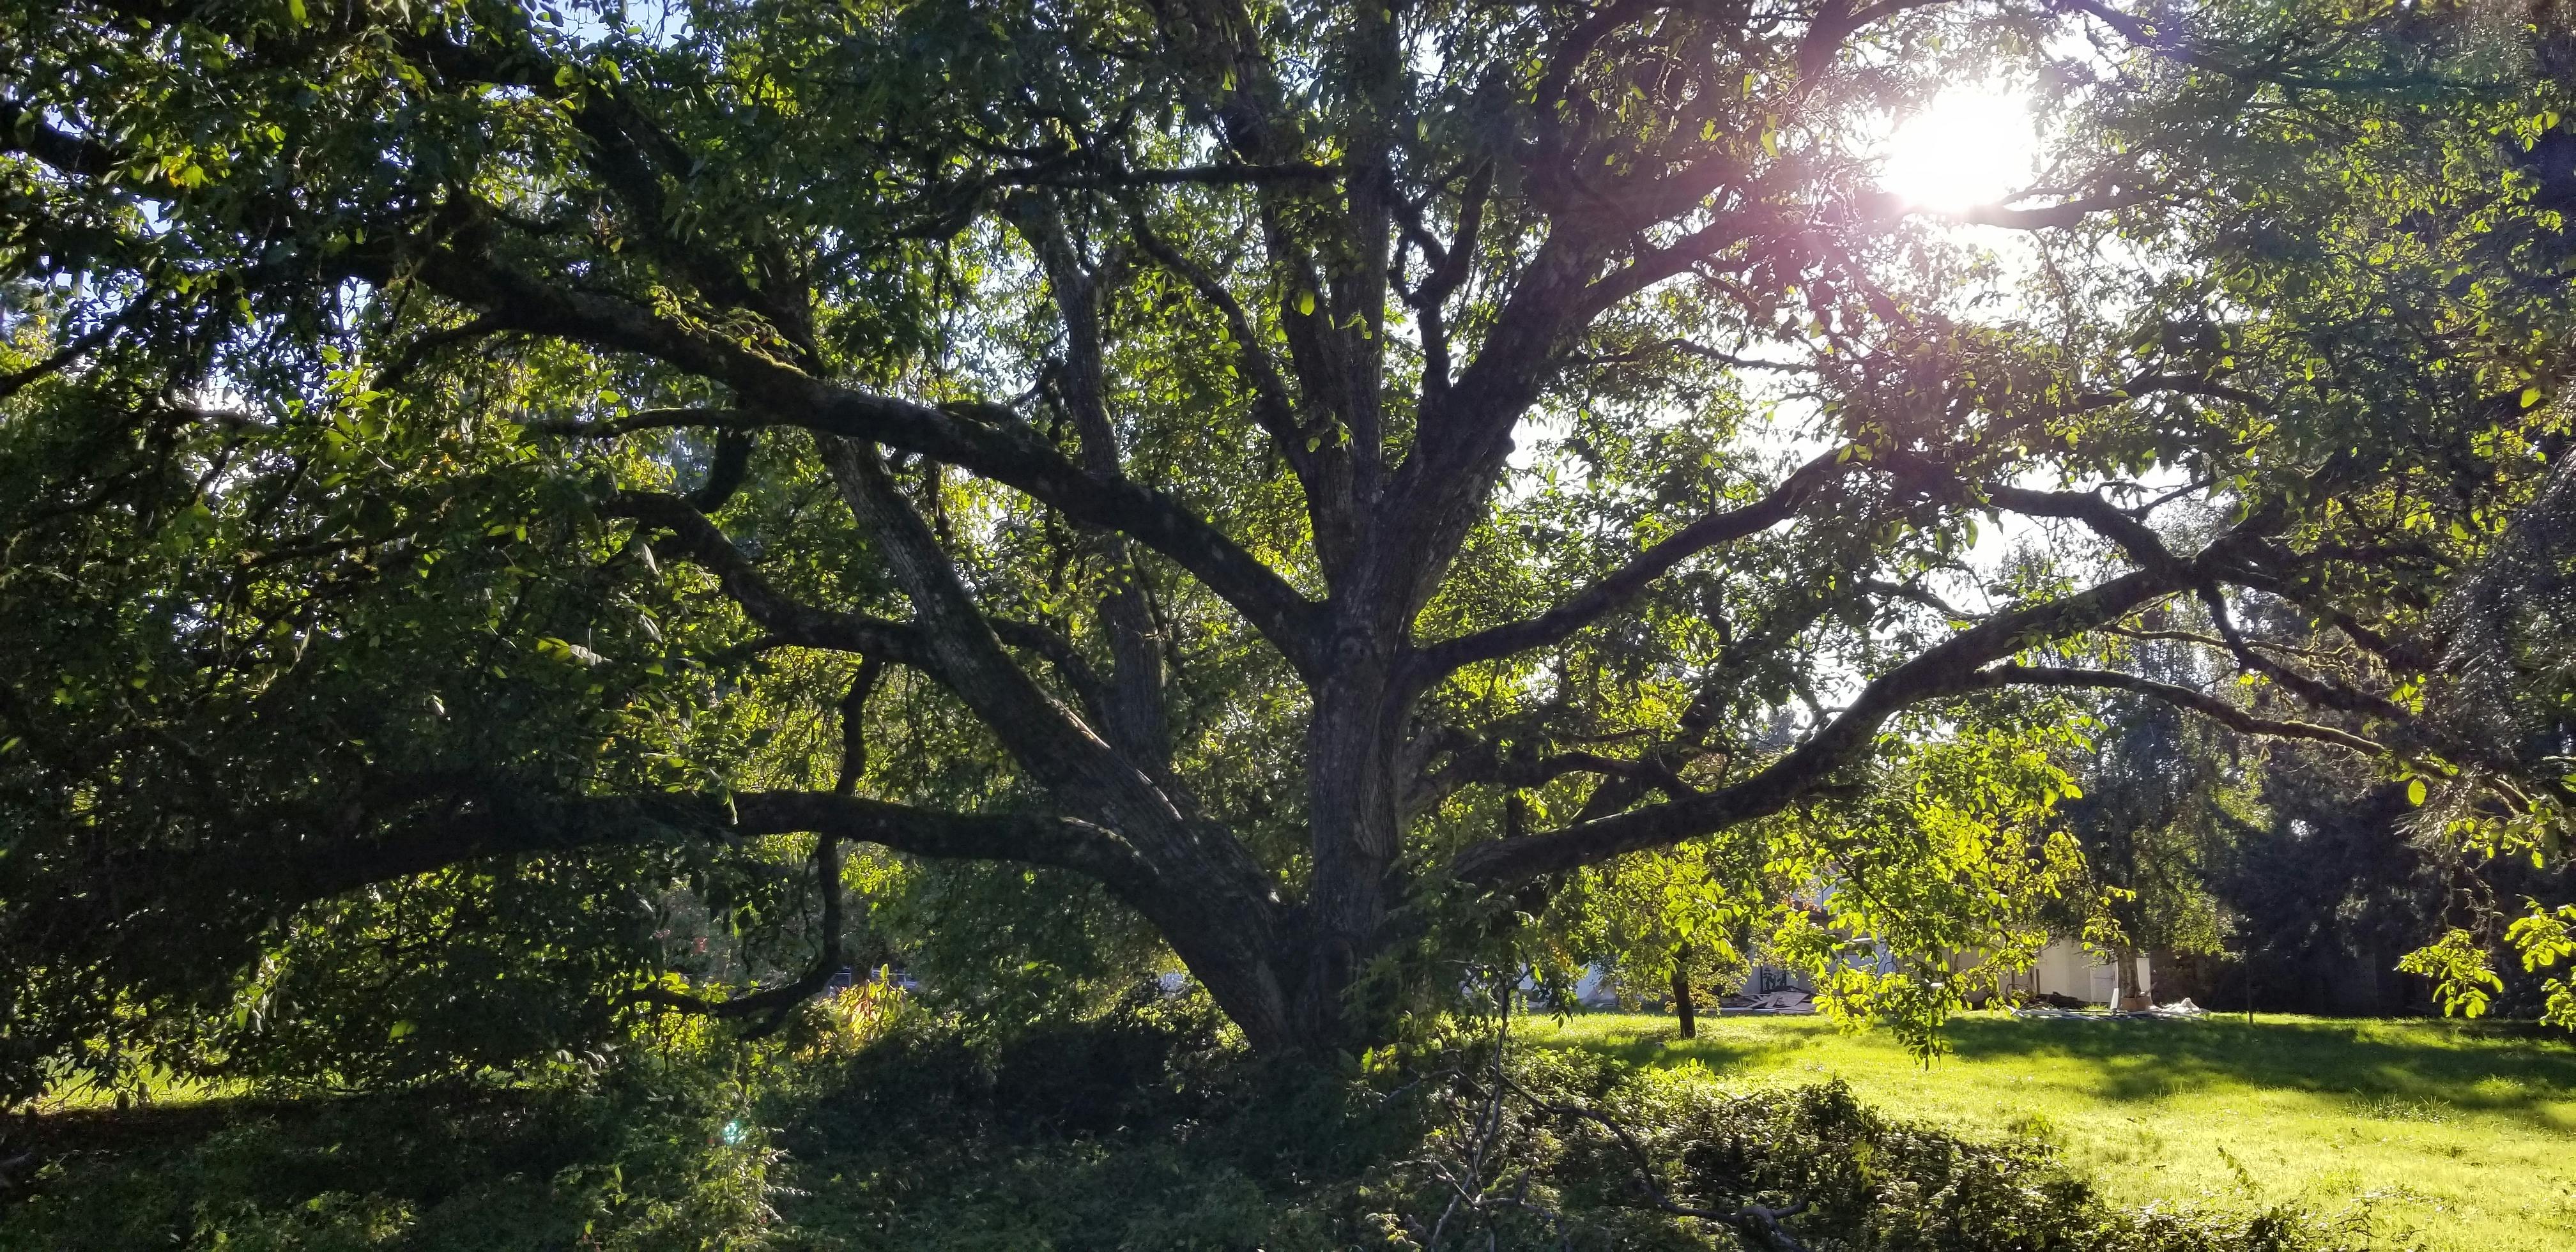 A mature walnut tree is a unique feature at Shaffer Park